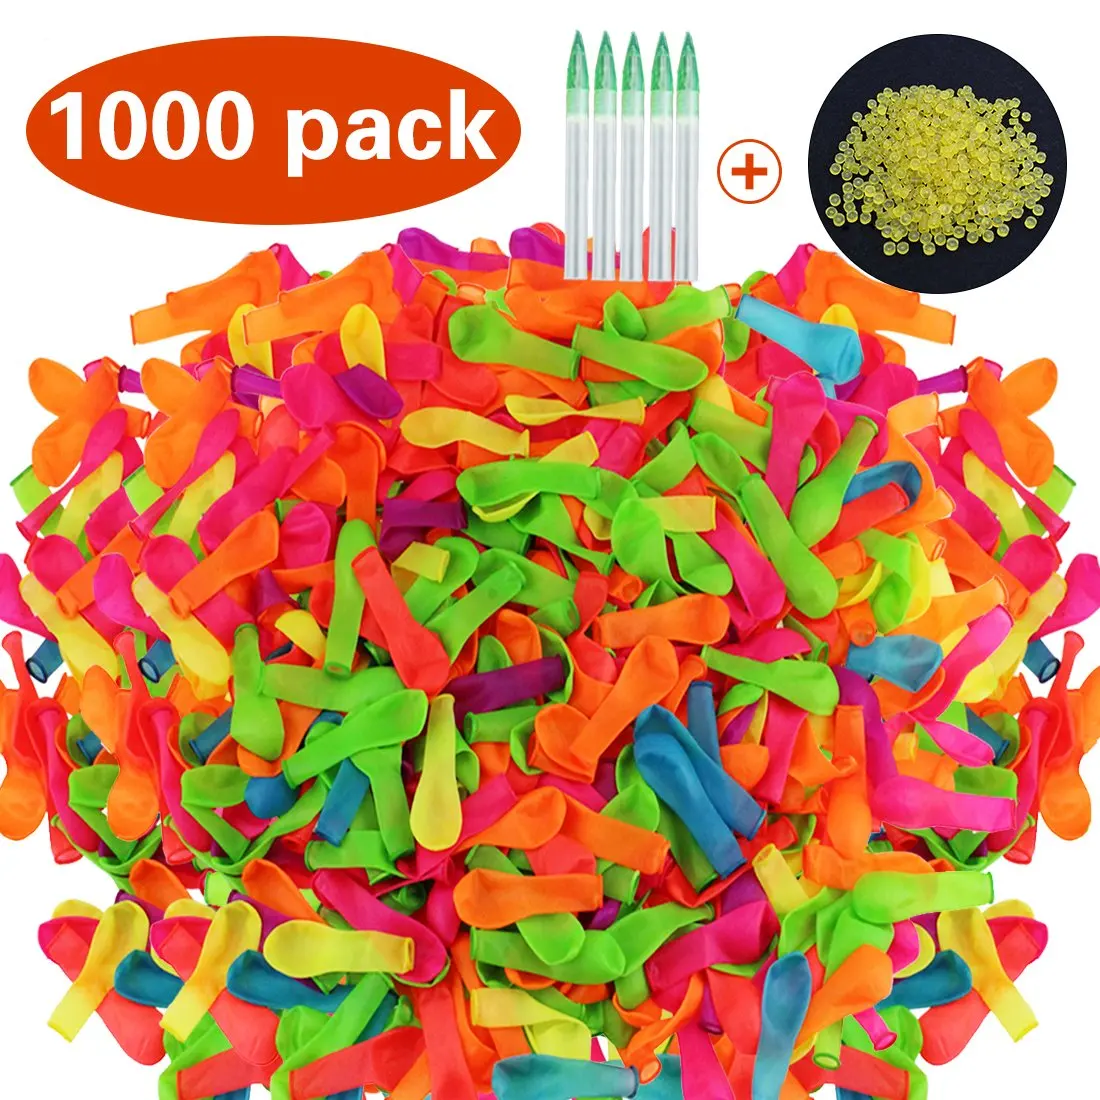 Water Balloons 222 Balloons Fight Games Sports Summer Splash Fun for Kids /& Adults Party Game Quick Fill Latex Water Bomb Game